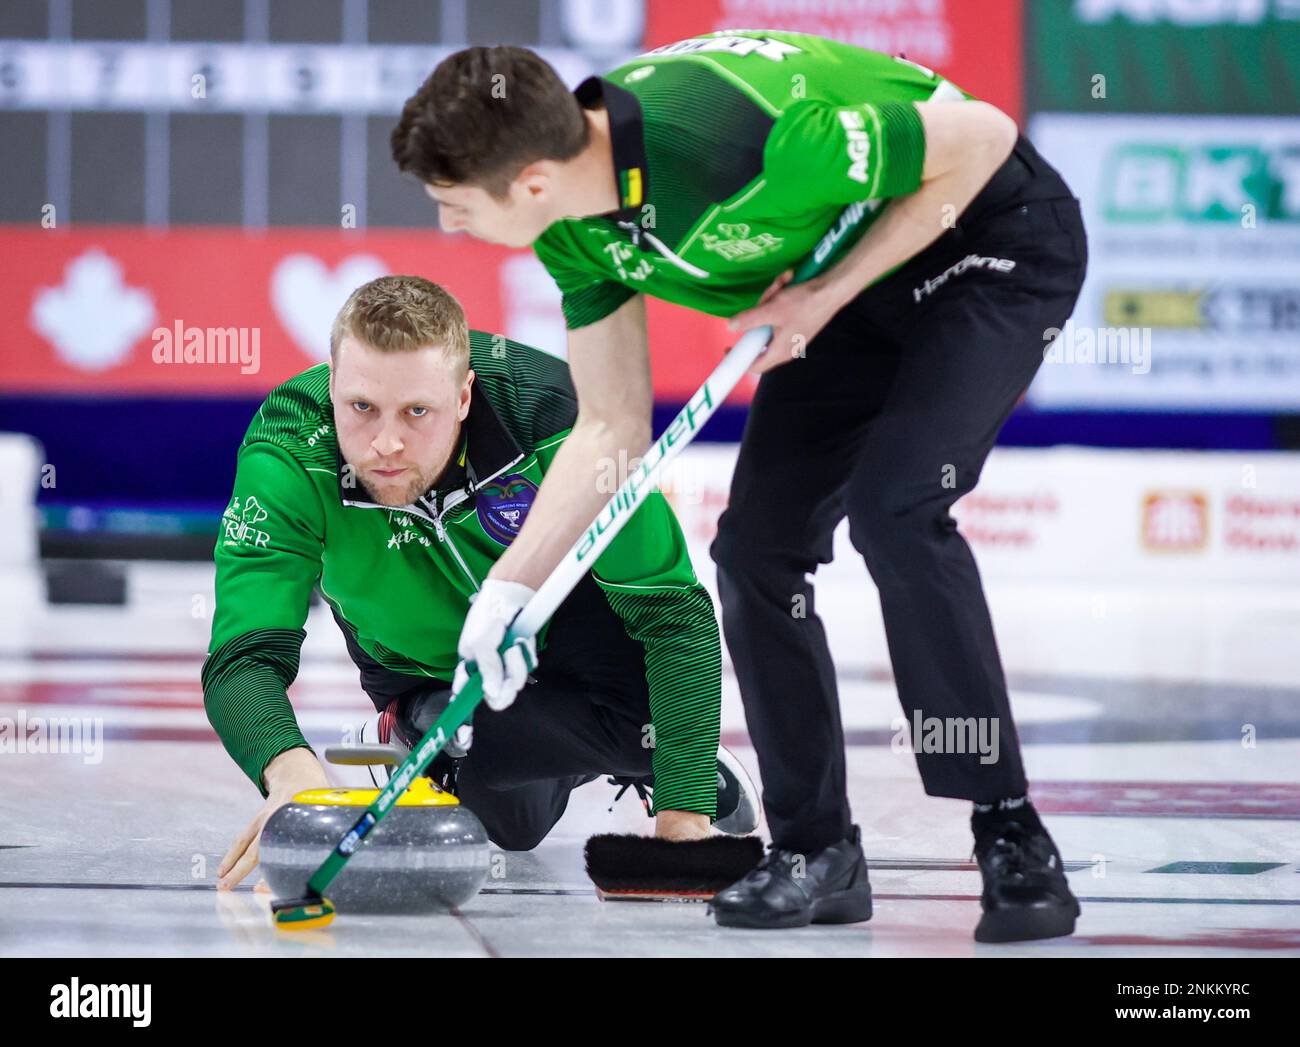 Team Saskatchewan skip Colton Flasch, left, makes a shot as second Kevin Marsh sweeps while playing Team Canada at the Tim Hortons Brier curling event in Lethbridge, Alberta, Monday, March 7, 2022